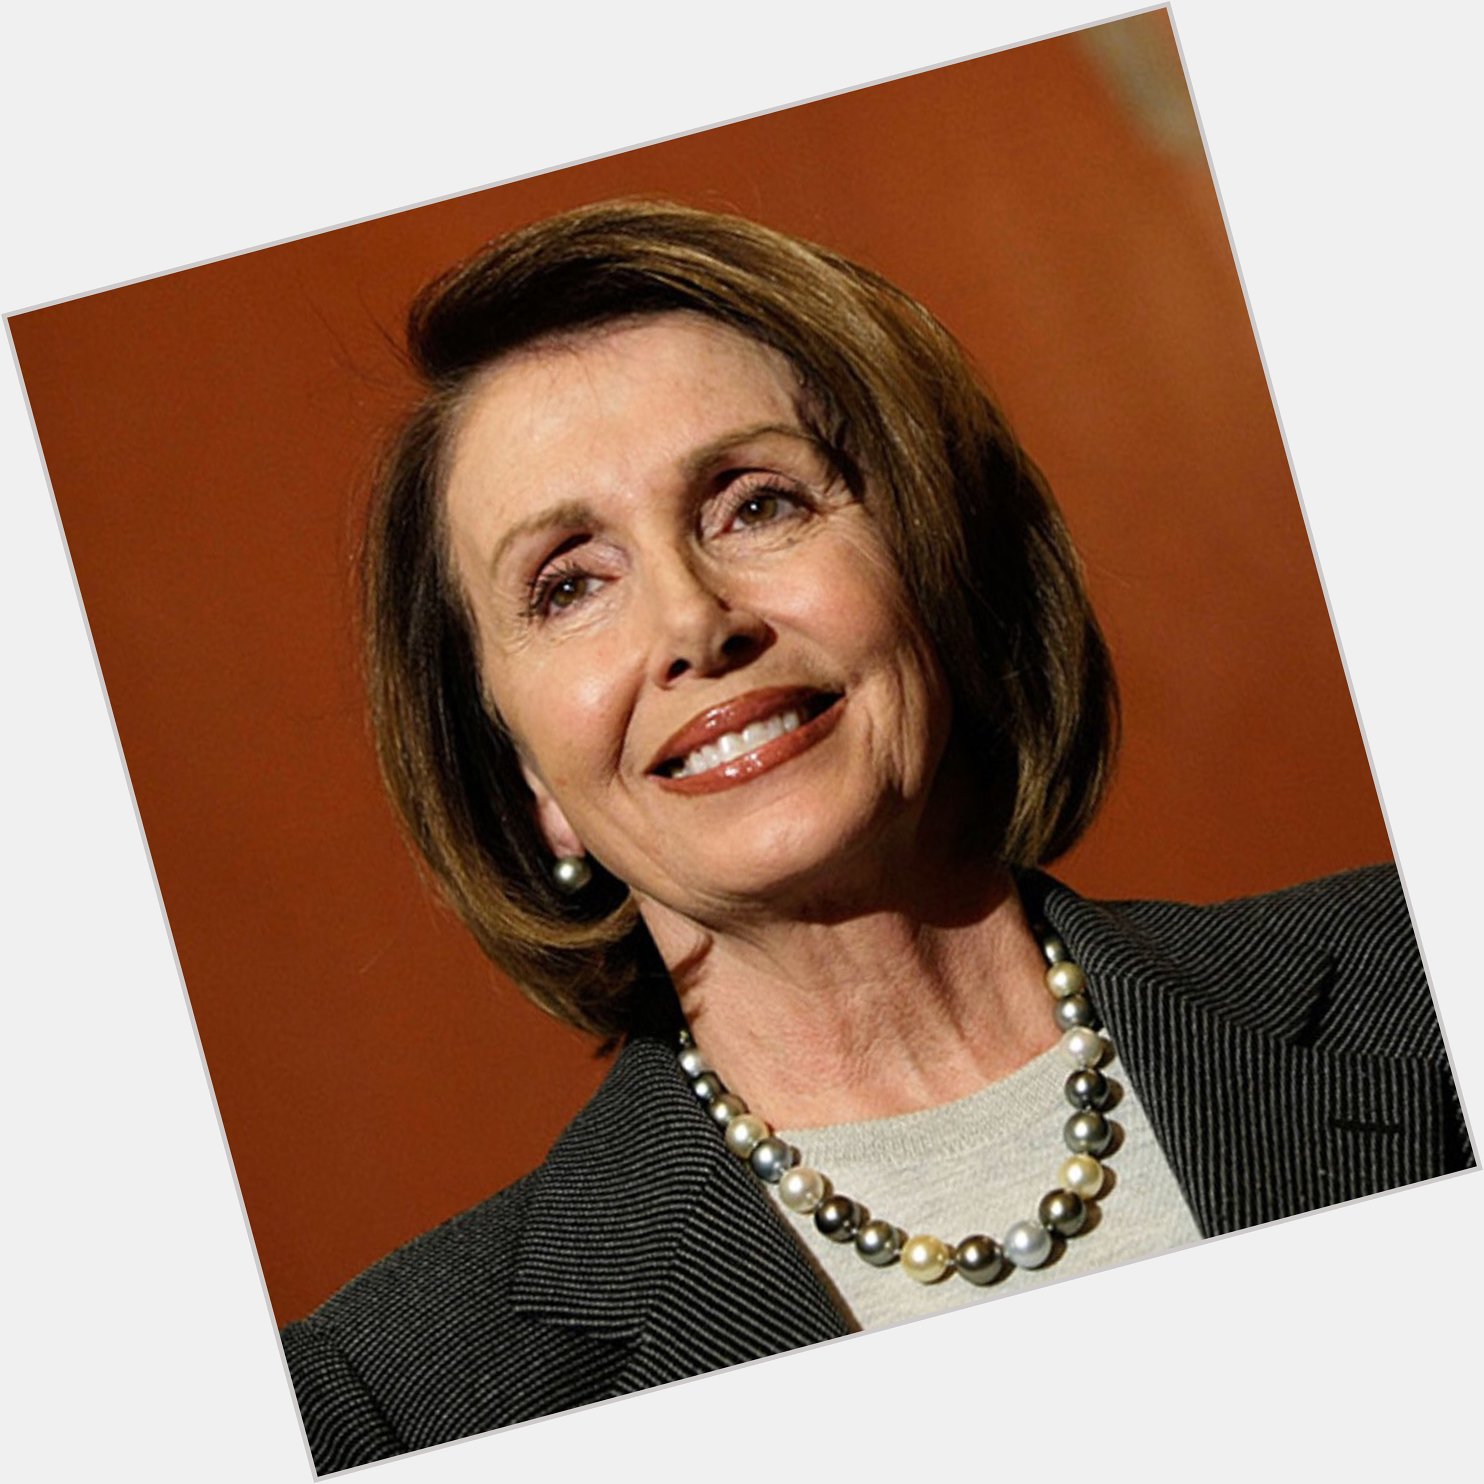 Happy Birthday to CALIFORNIA, by way of Baltimore s OWN, OUR SPEAKER OF THE HOUSE, Nancy Pelosi. 